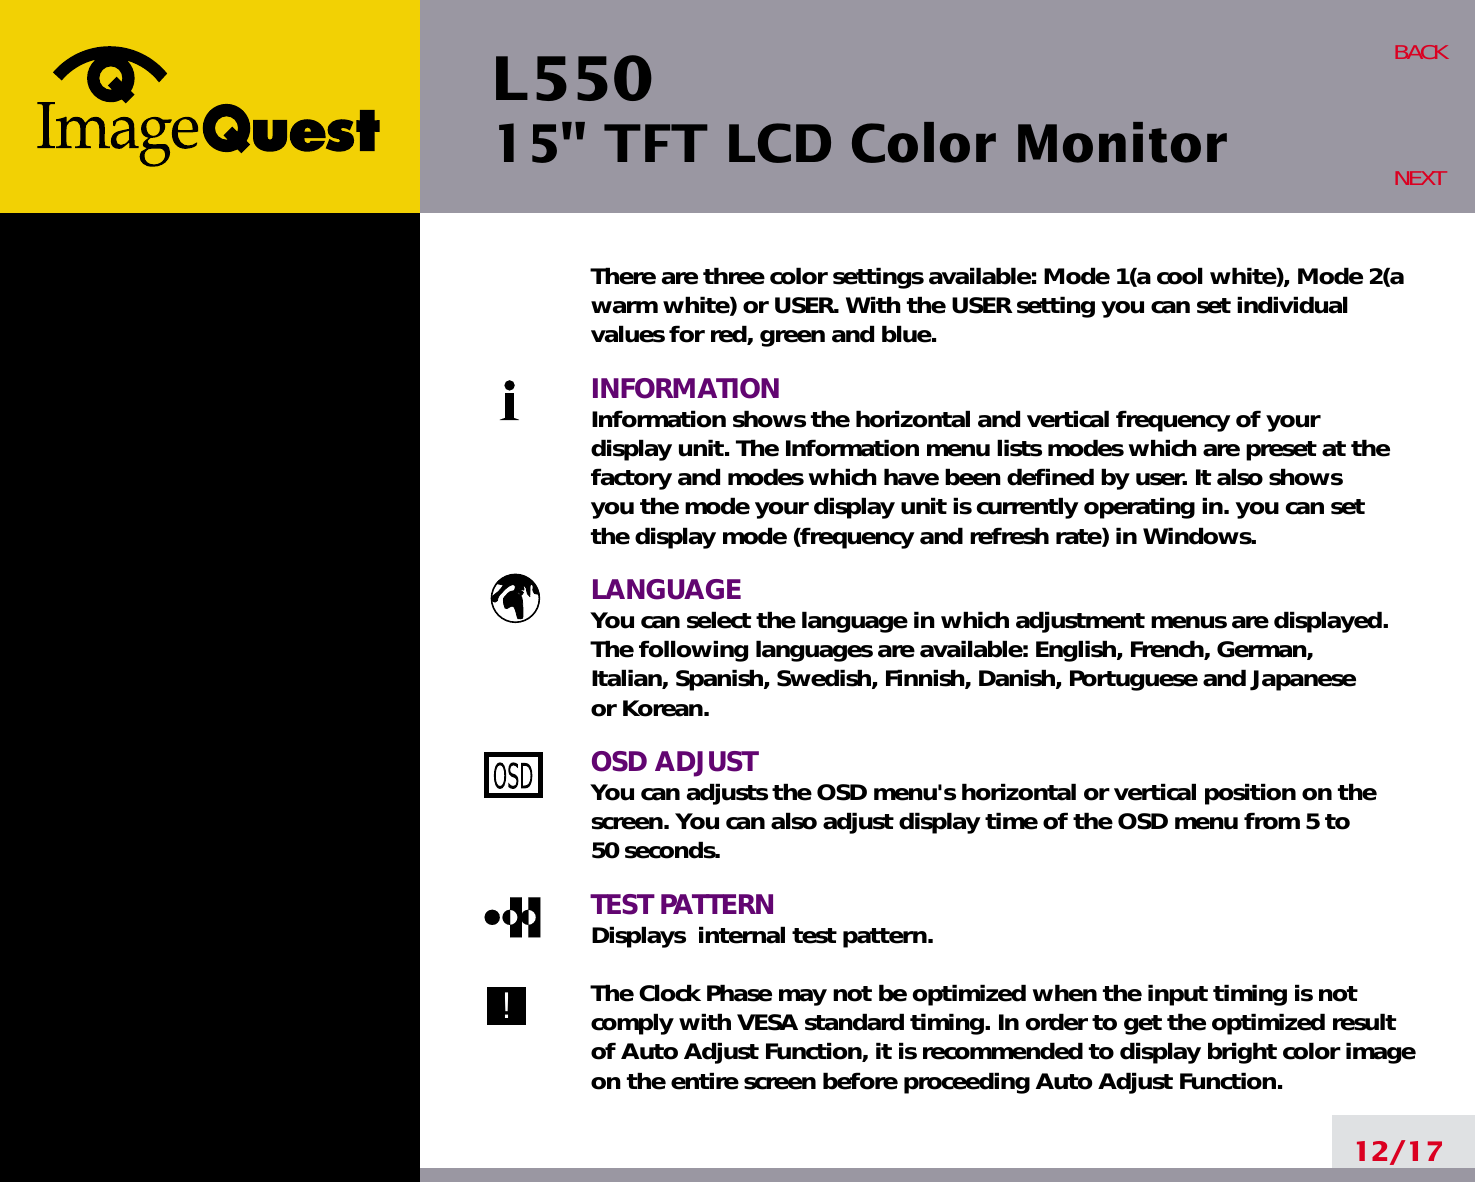 L550 15&quot; TFT LCD Color Monitor12/17BACKNEXTThere are three color settings available: Mode 1(a cool white), Mode 2(awarm white) or USER. With the USER setting you can set individualvalues for red, green and blue.INFORMATIONInformation shows the horizontal and vertical frequency of your display unit. The Information menu lists modes which are preset at the factory and modes which have been defined by user. It also shows you the mode your display unit is currently operating in. you can set the display mode (frequency and refresh rate) in Windows.LANGUAGEYou can select the language in which adjustment menus are displayed. The following languages are available: English, French, German, Italian, Spanish, Swedish, Finnish, Danish, Portuguese and Japanese or Korean.OSD ADJUSTYou can adjusts the OSD menu&apos;s horizontal or vertical position on the screen. You can also adjust display time of the OSD menu from 5 to 50 seconds.TEST PATTERNDisplays  internal test pattern.The Clock Phase may not be optimized when the input timing is notcomply with VESA standard timing. In order to get the optimized resultof Auto Adjust Function, it is recommended to display bright color imageon the entire screen before proceeding Auto Adjust Function.!